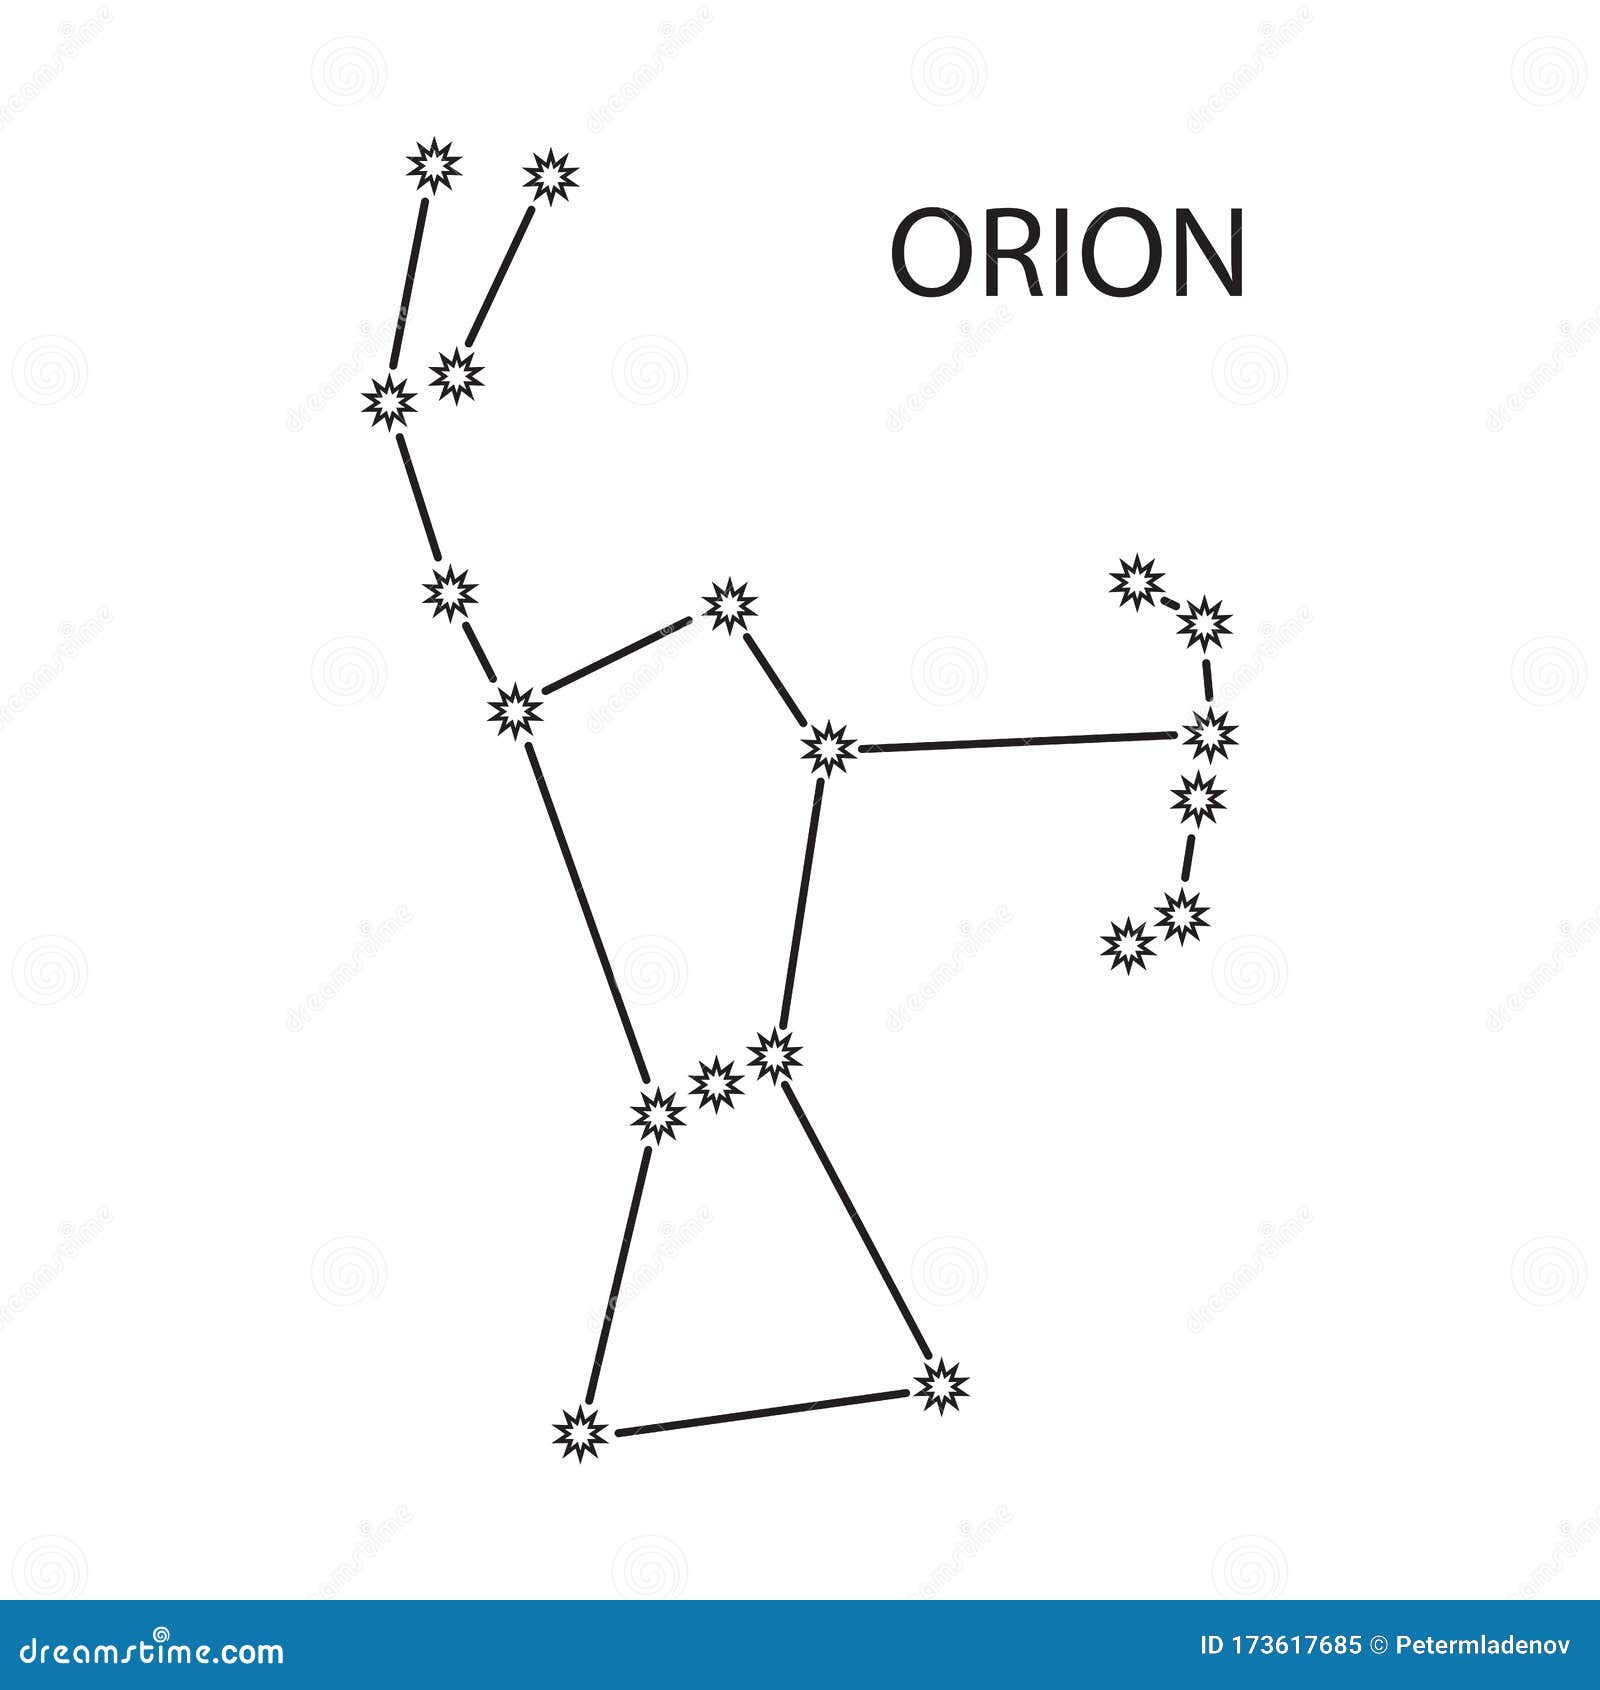 orion constellation stars sign with titles.   ,  on white background